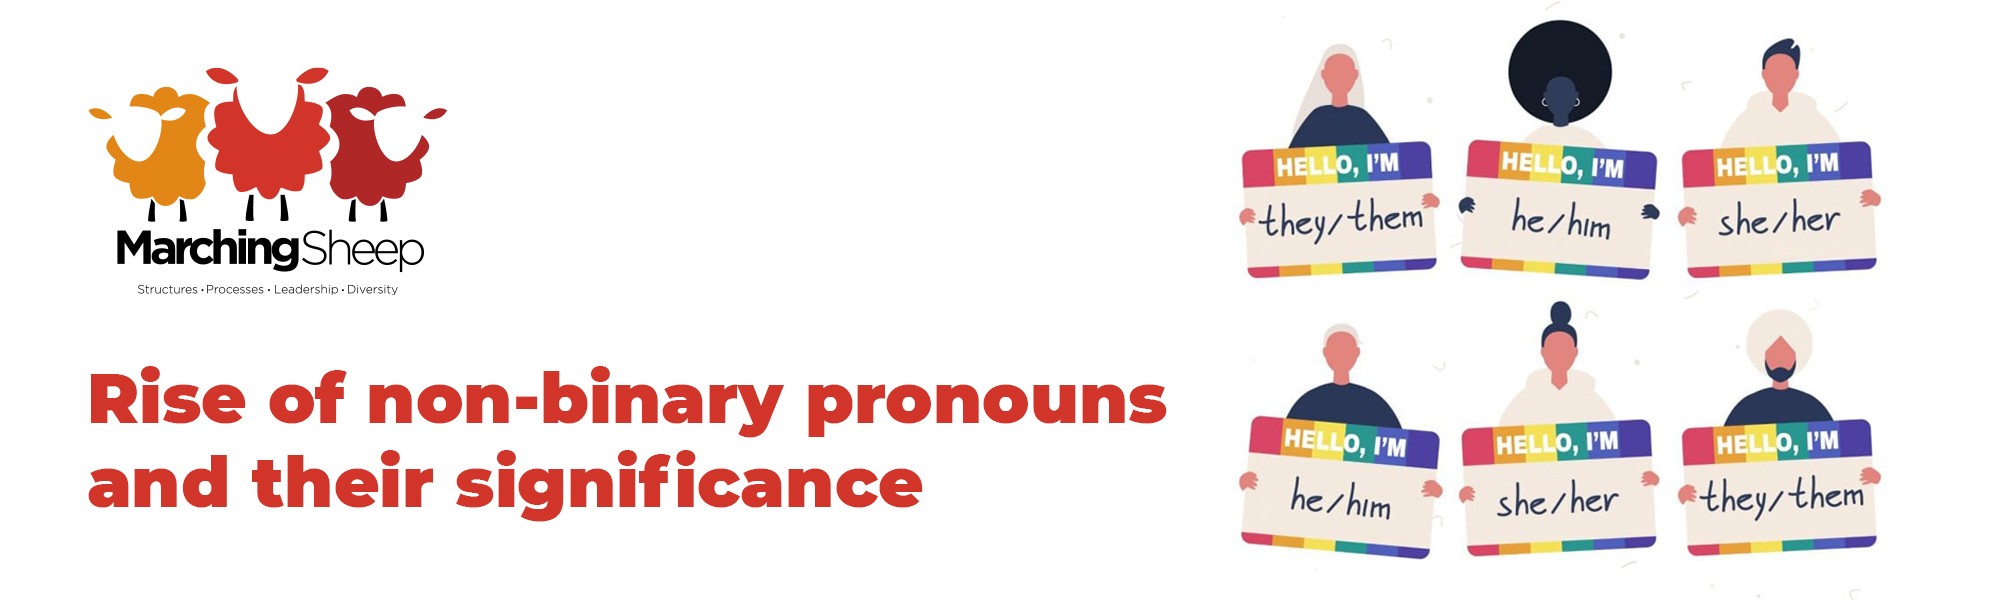 There’s more to people than labels- Rise of non-binary pronouns and ...